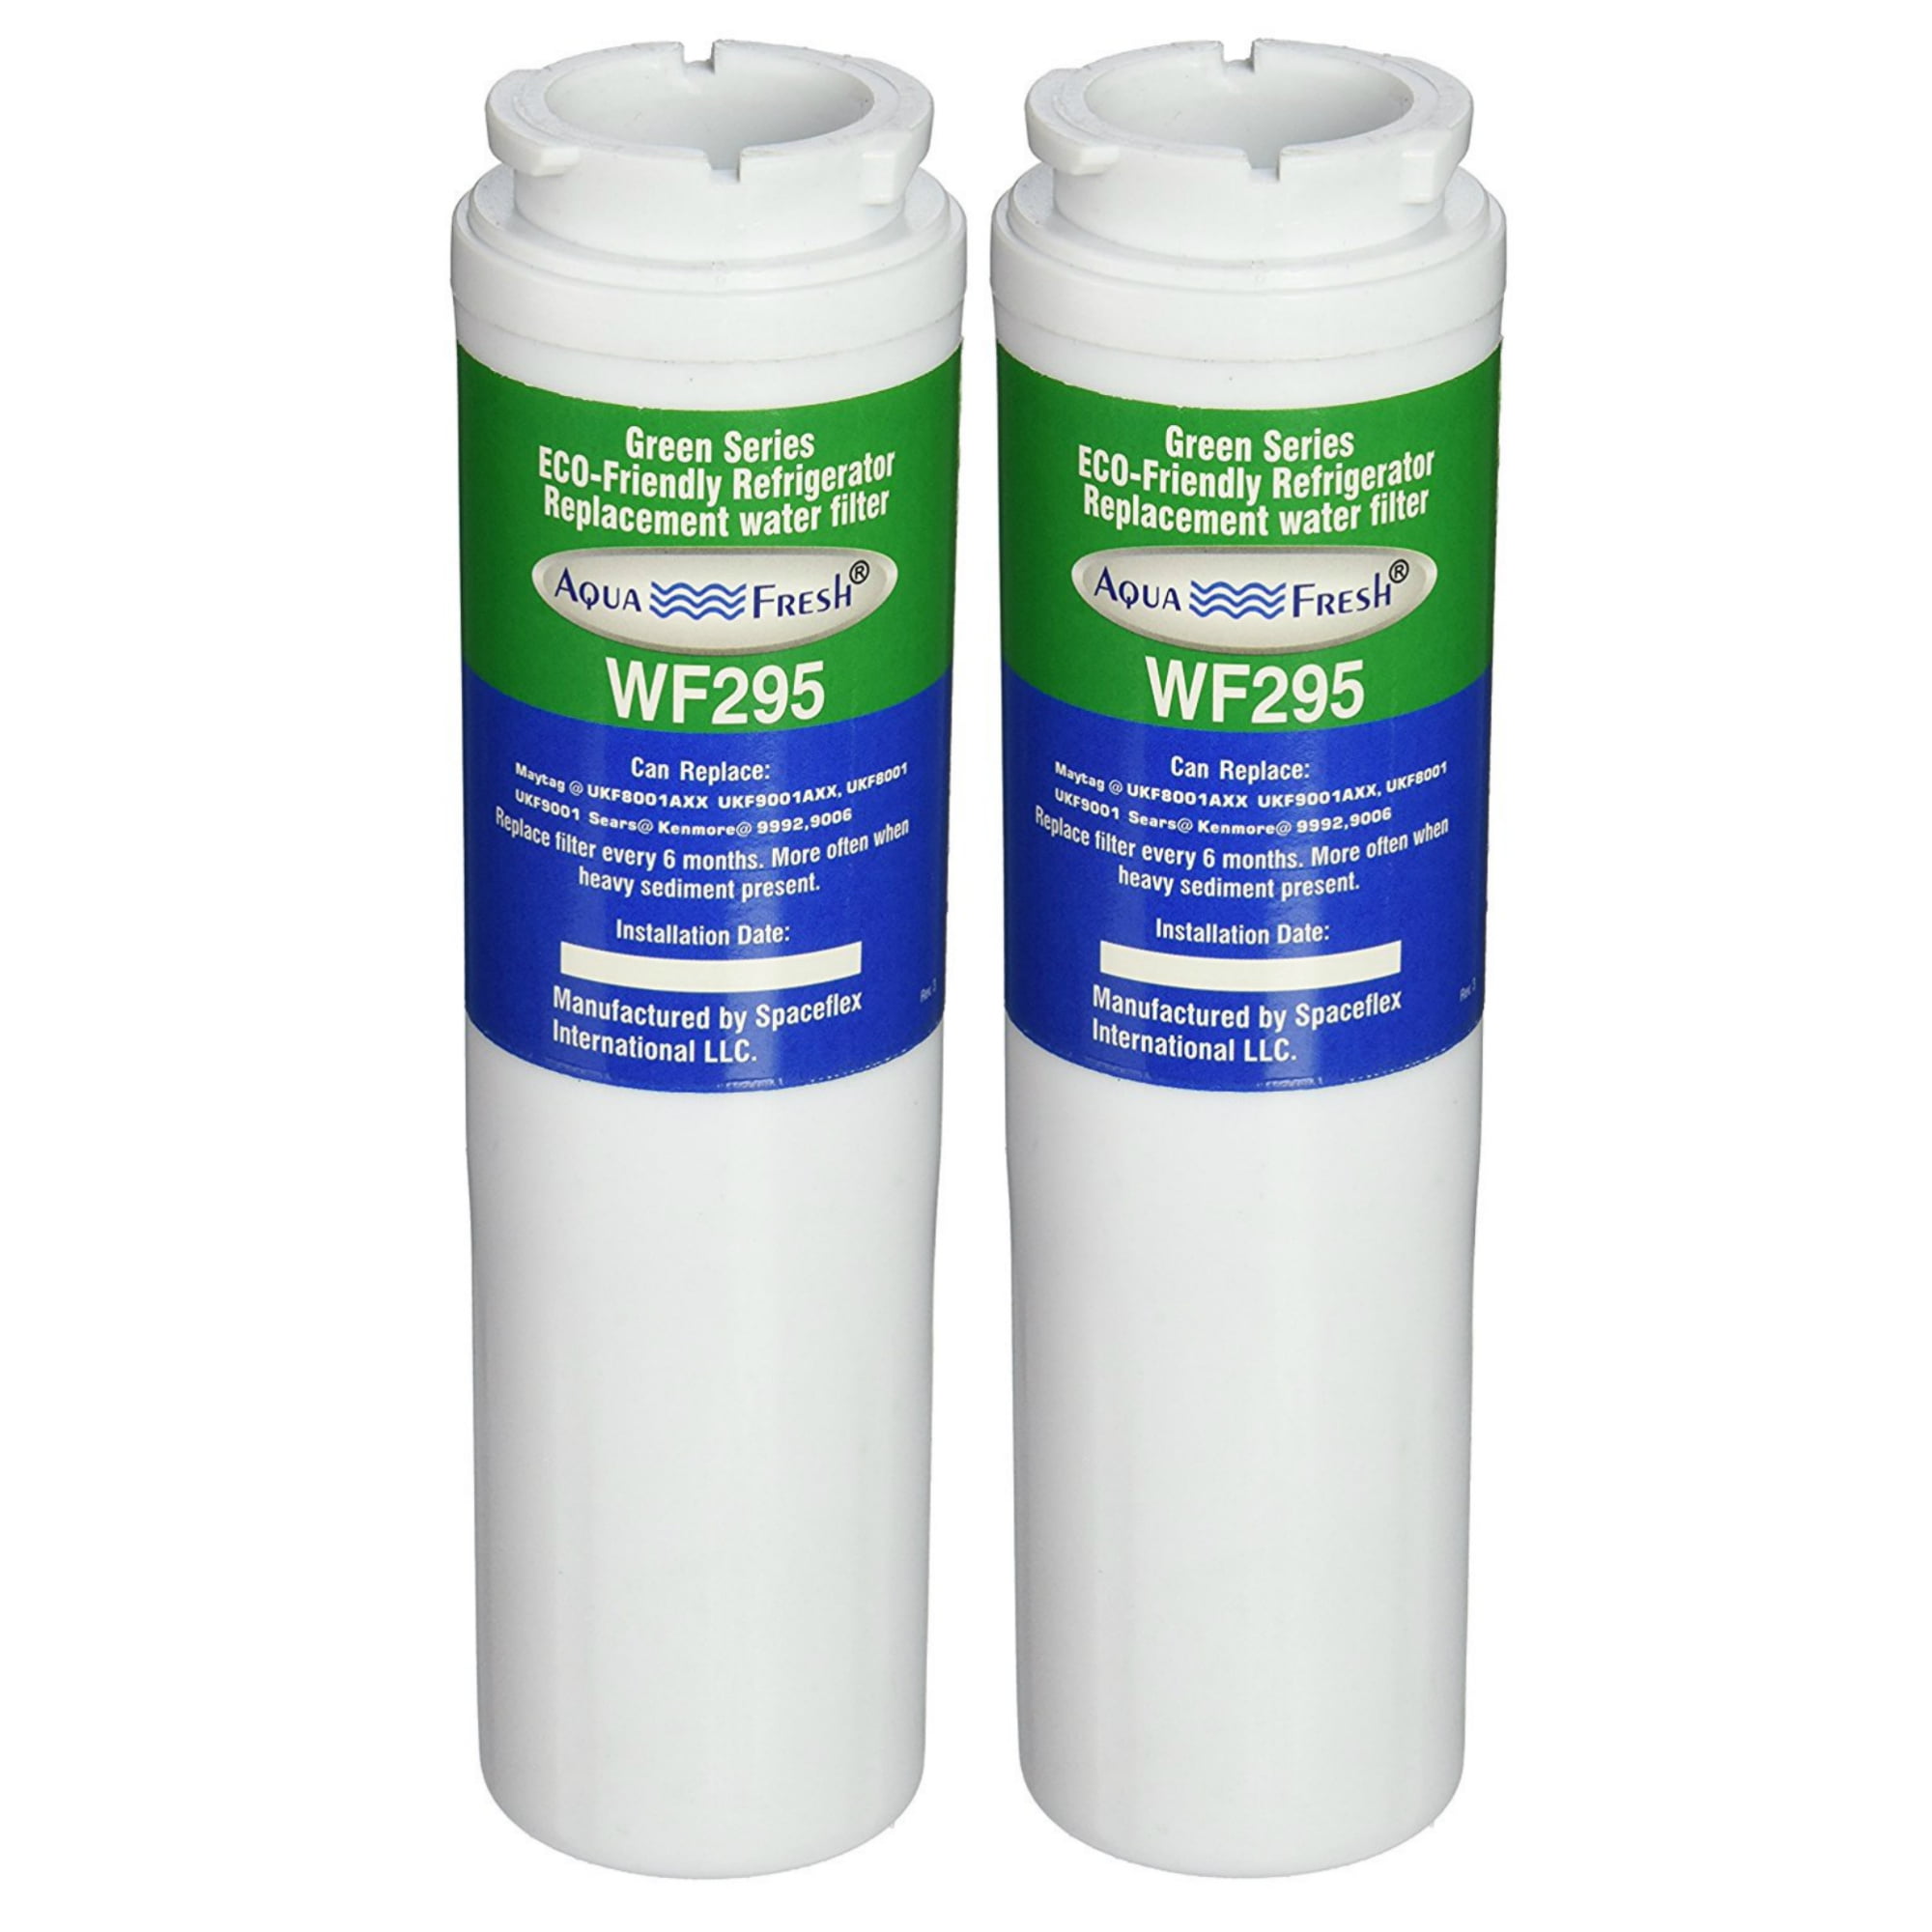 Fits Maytag WSM-2 Refrigerators 4 Pack Refresh Replacement Water Filter 